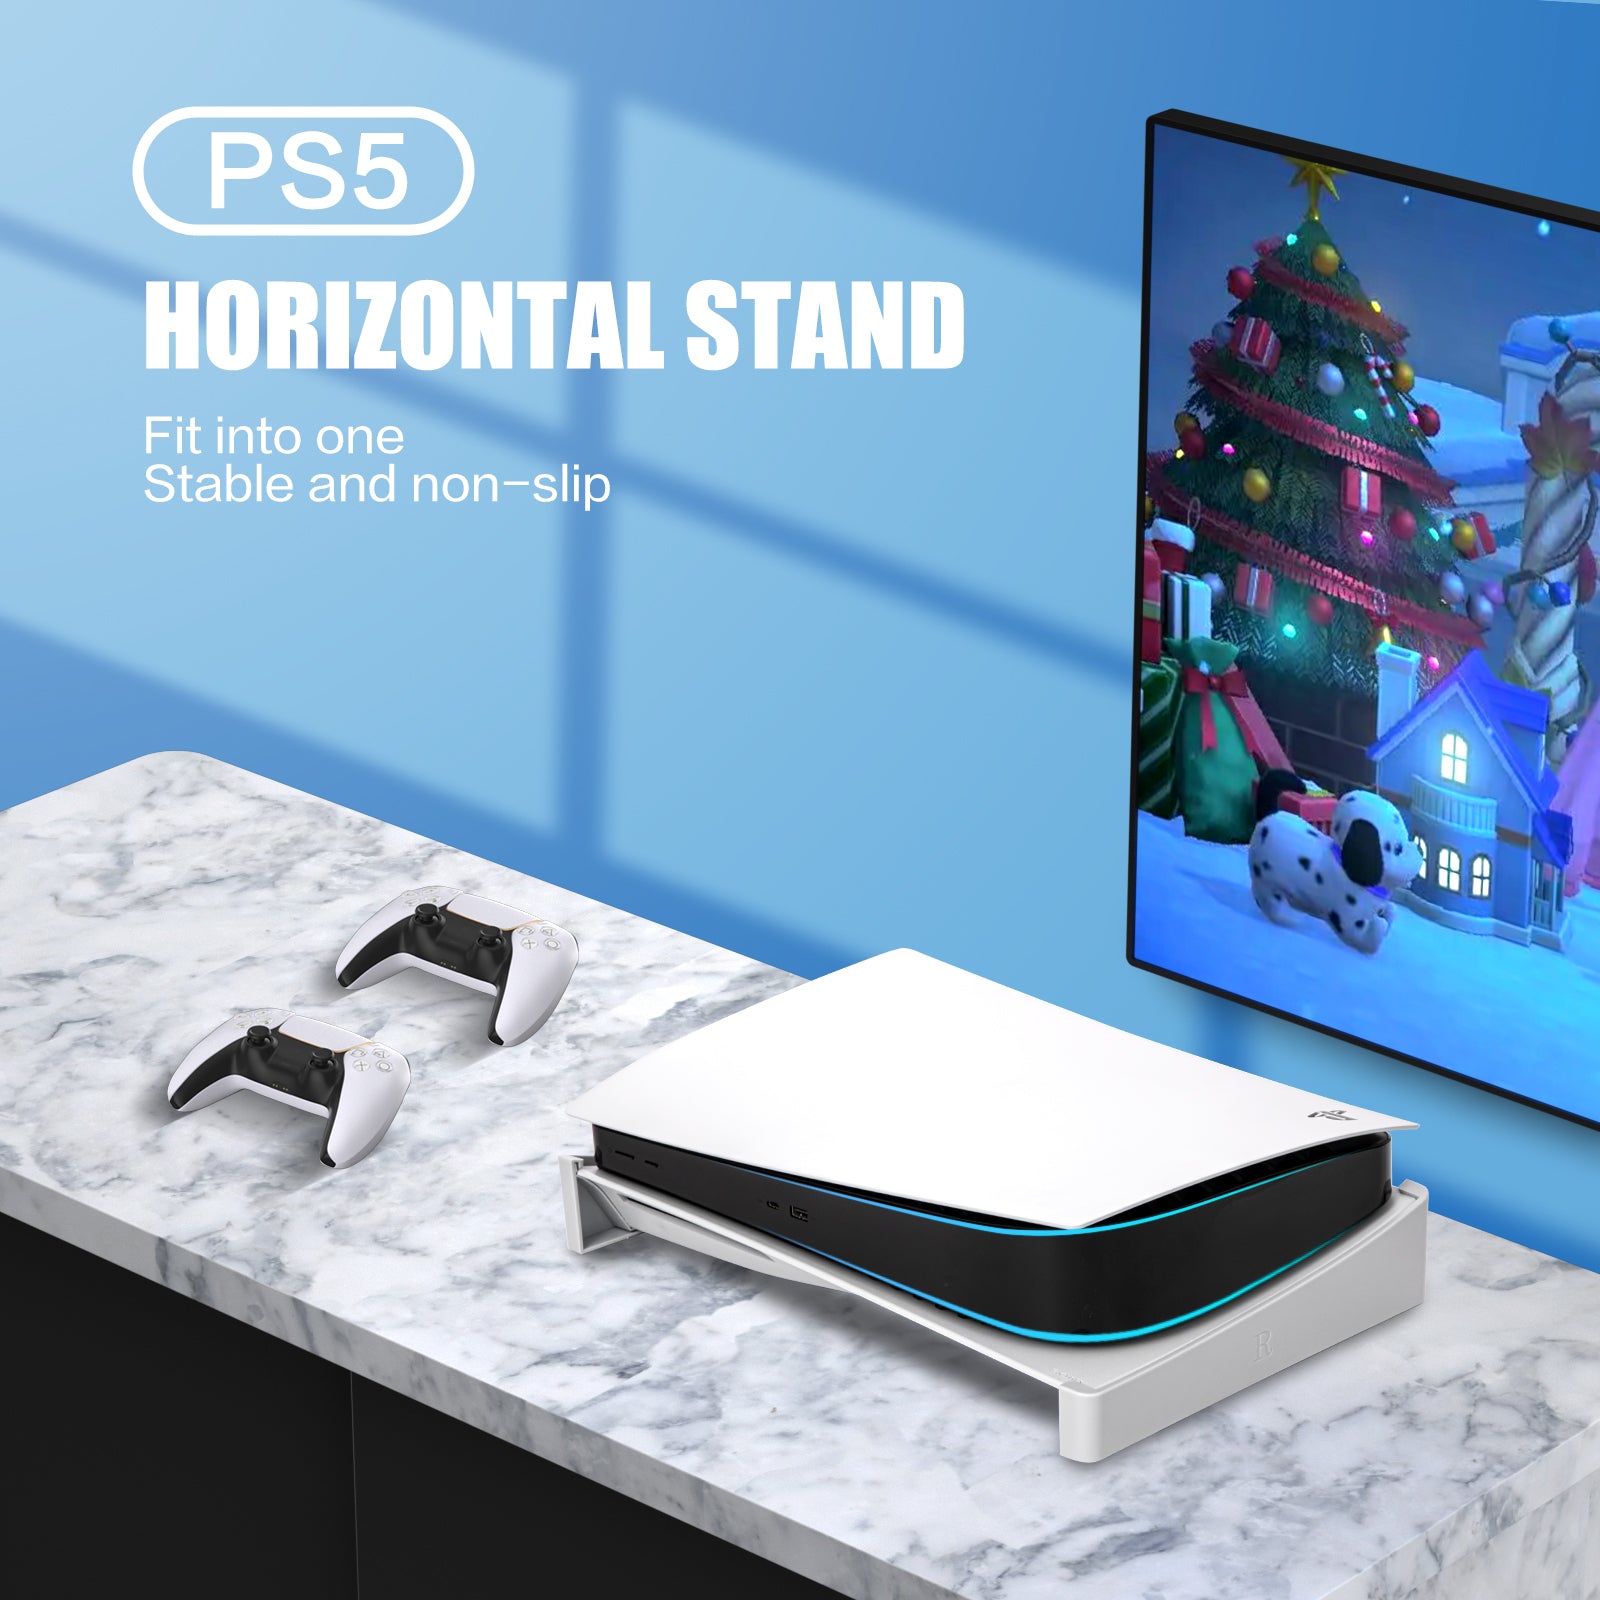 MENEEA Horizontal Stand for PS5 Console with 4-Port USB Hub, Upgraded Base  Skate Holder Accessories for Playstation 5 Disc & Digital Edition,3